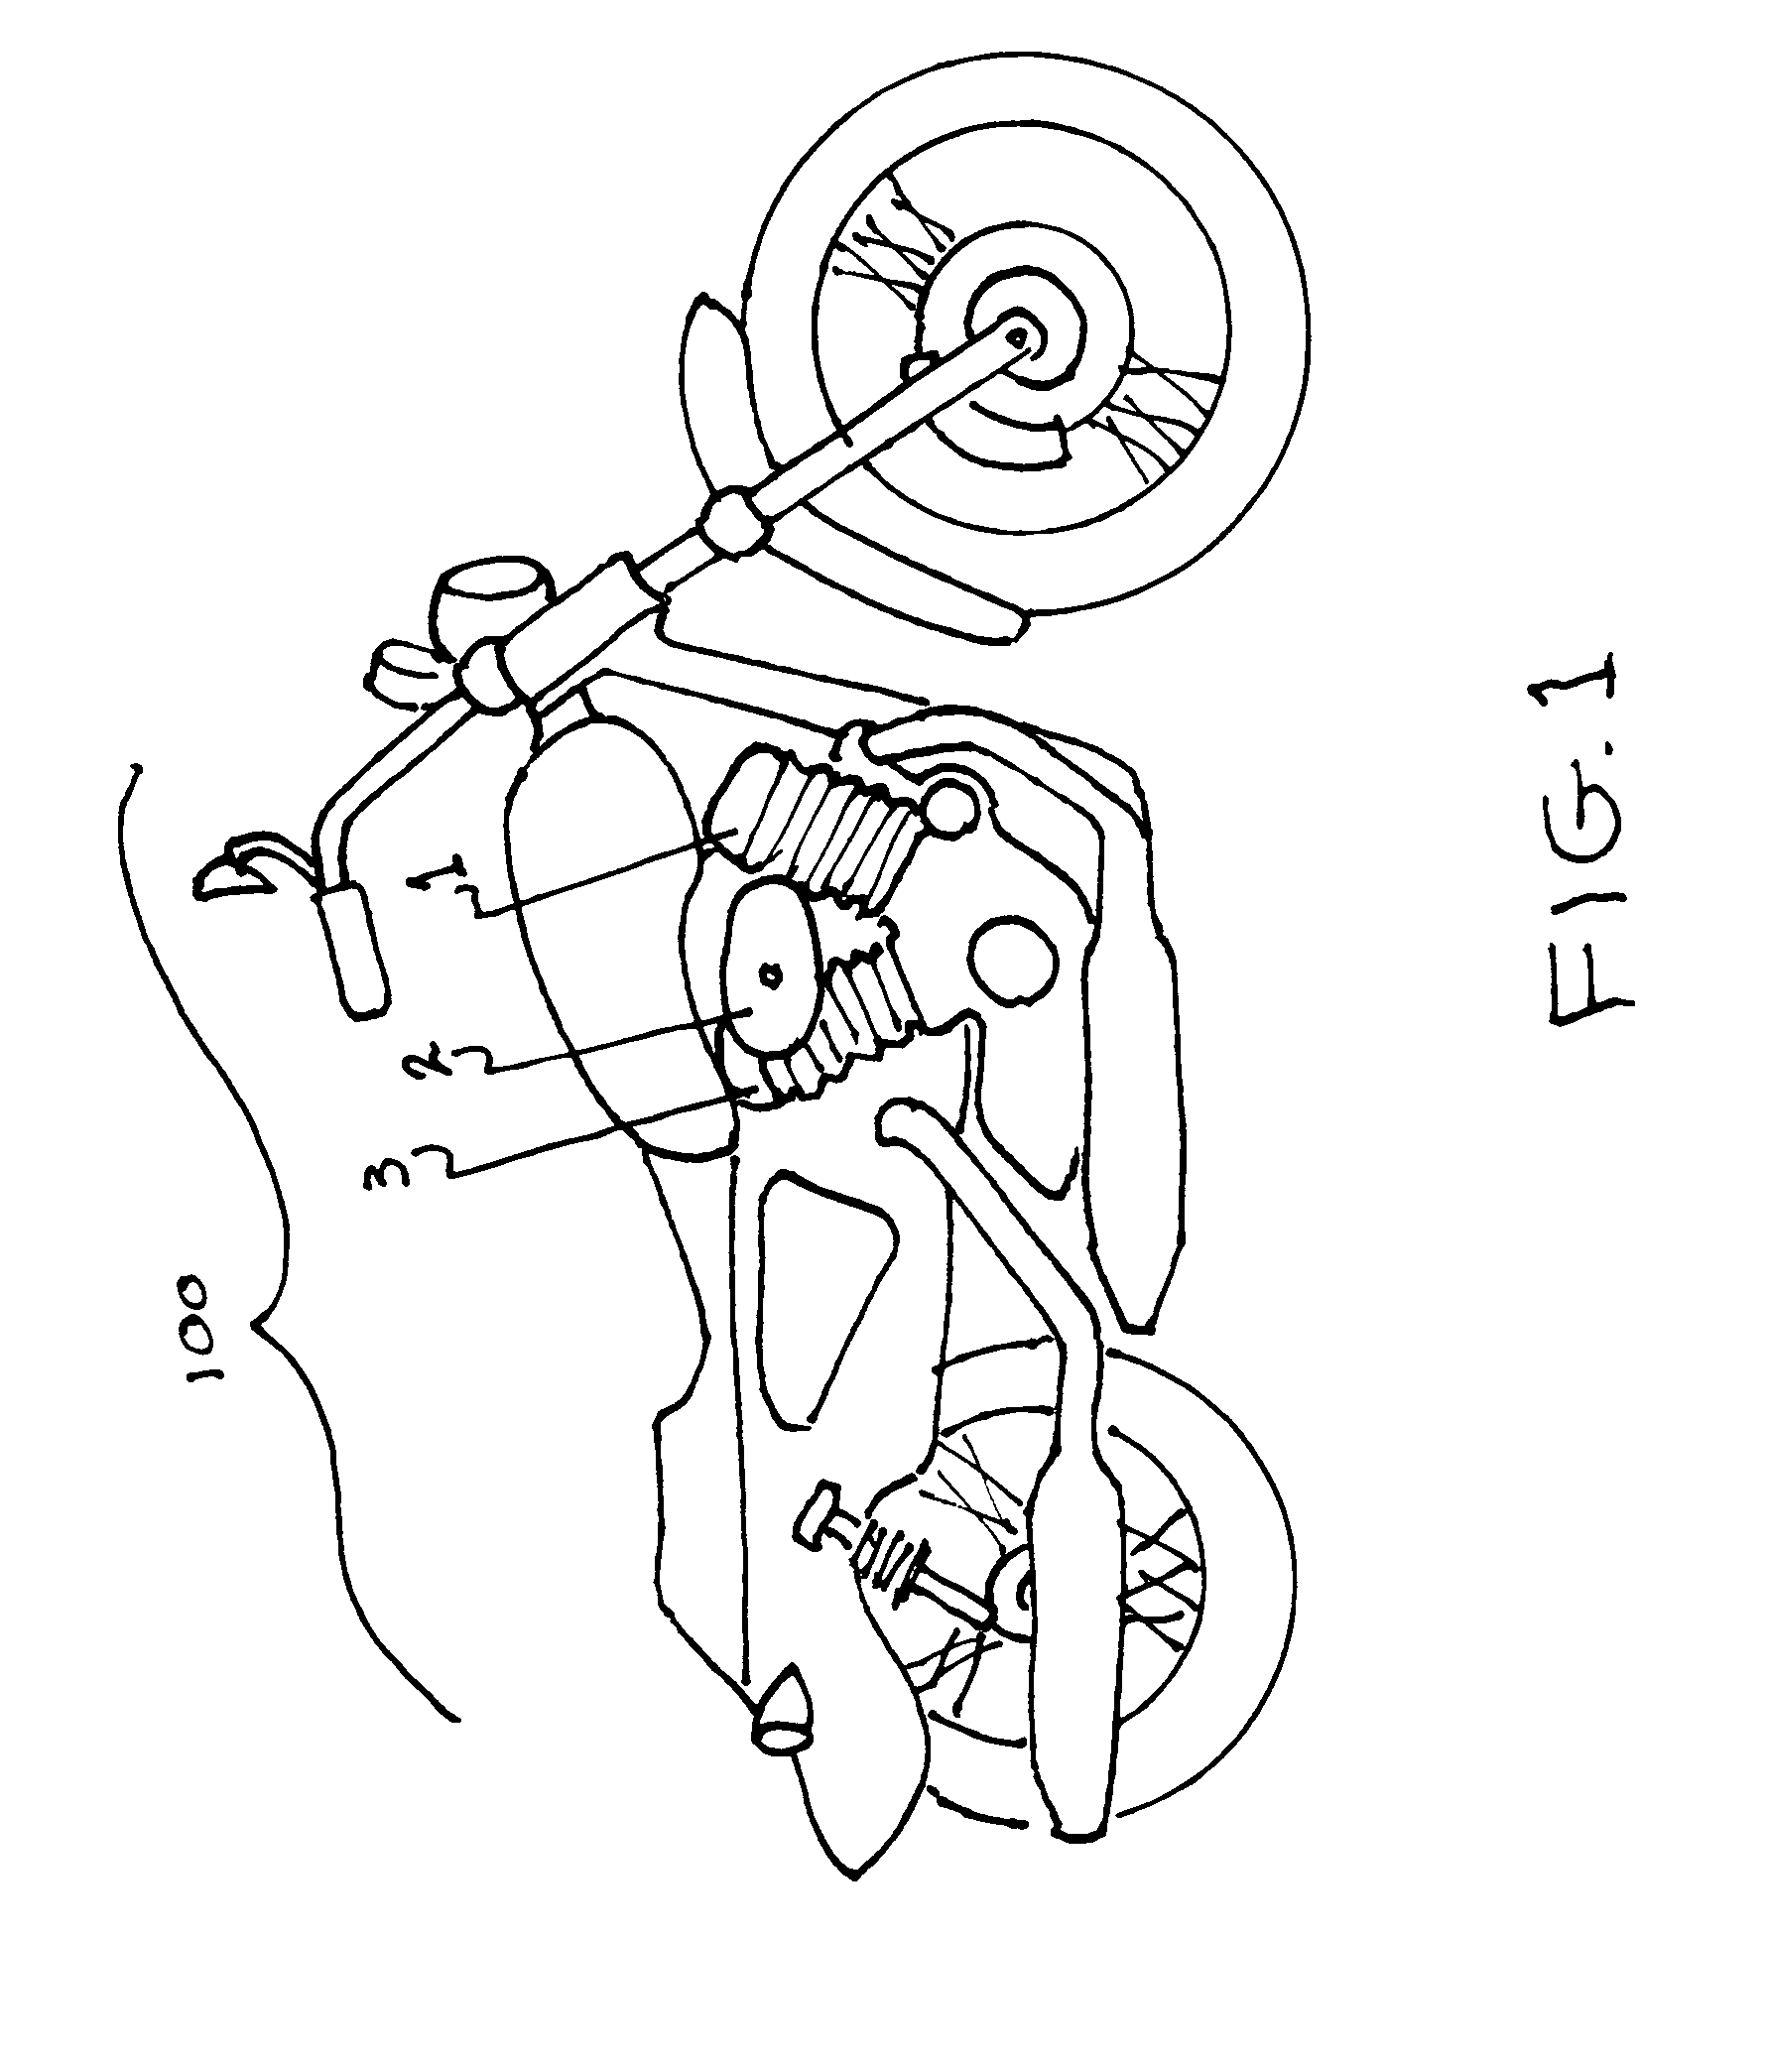 Air directing device for motorcycles